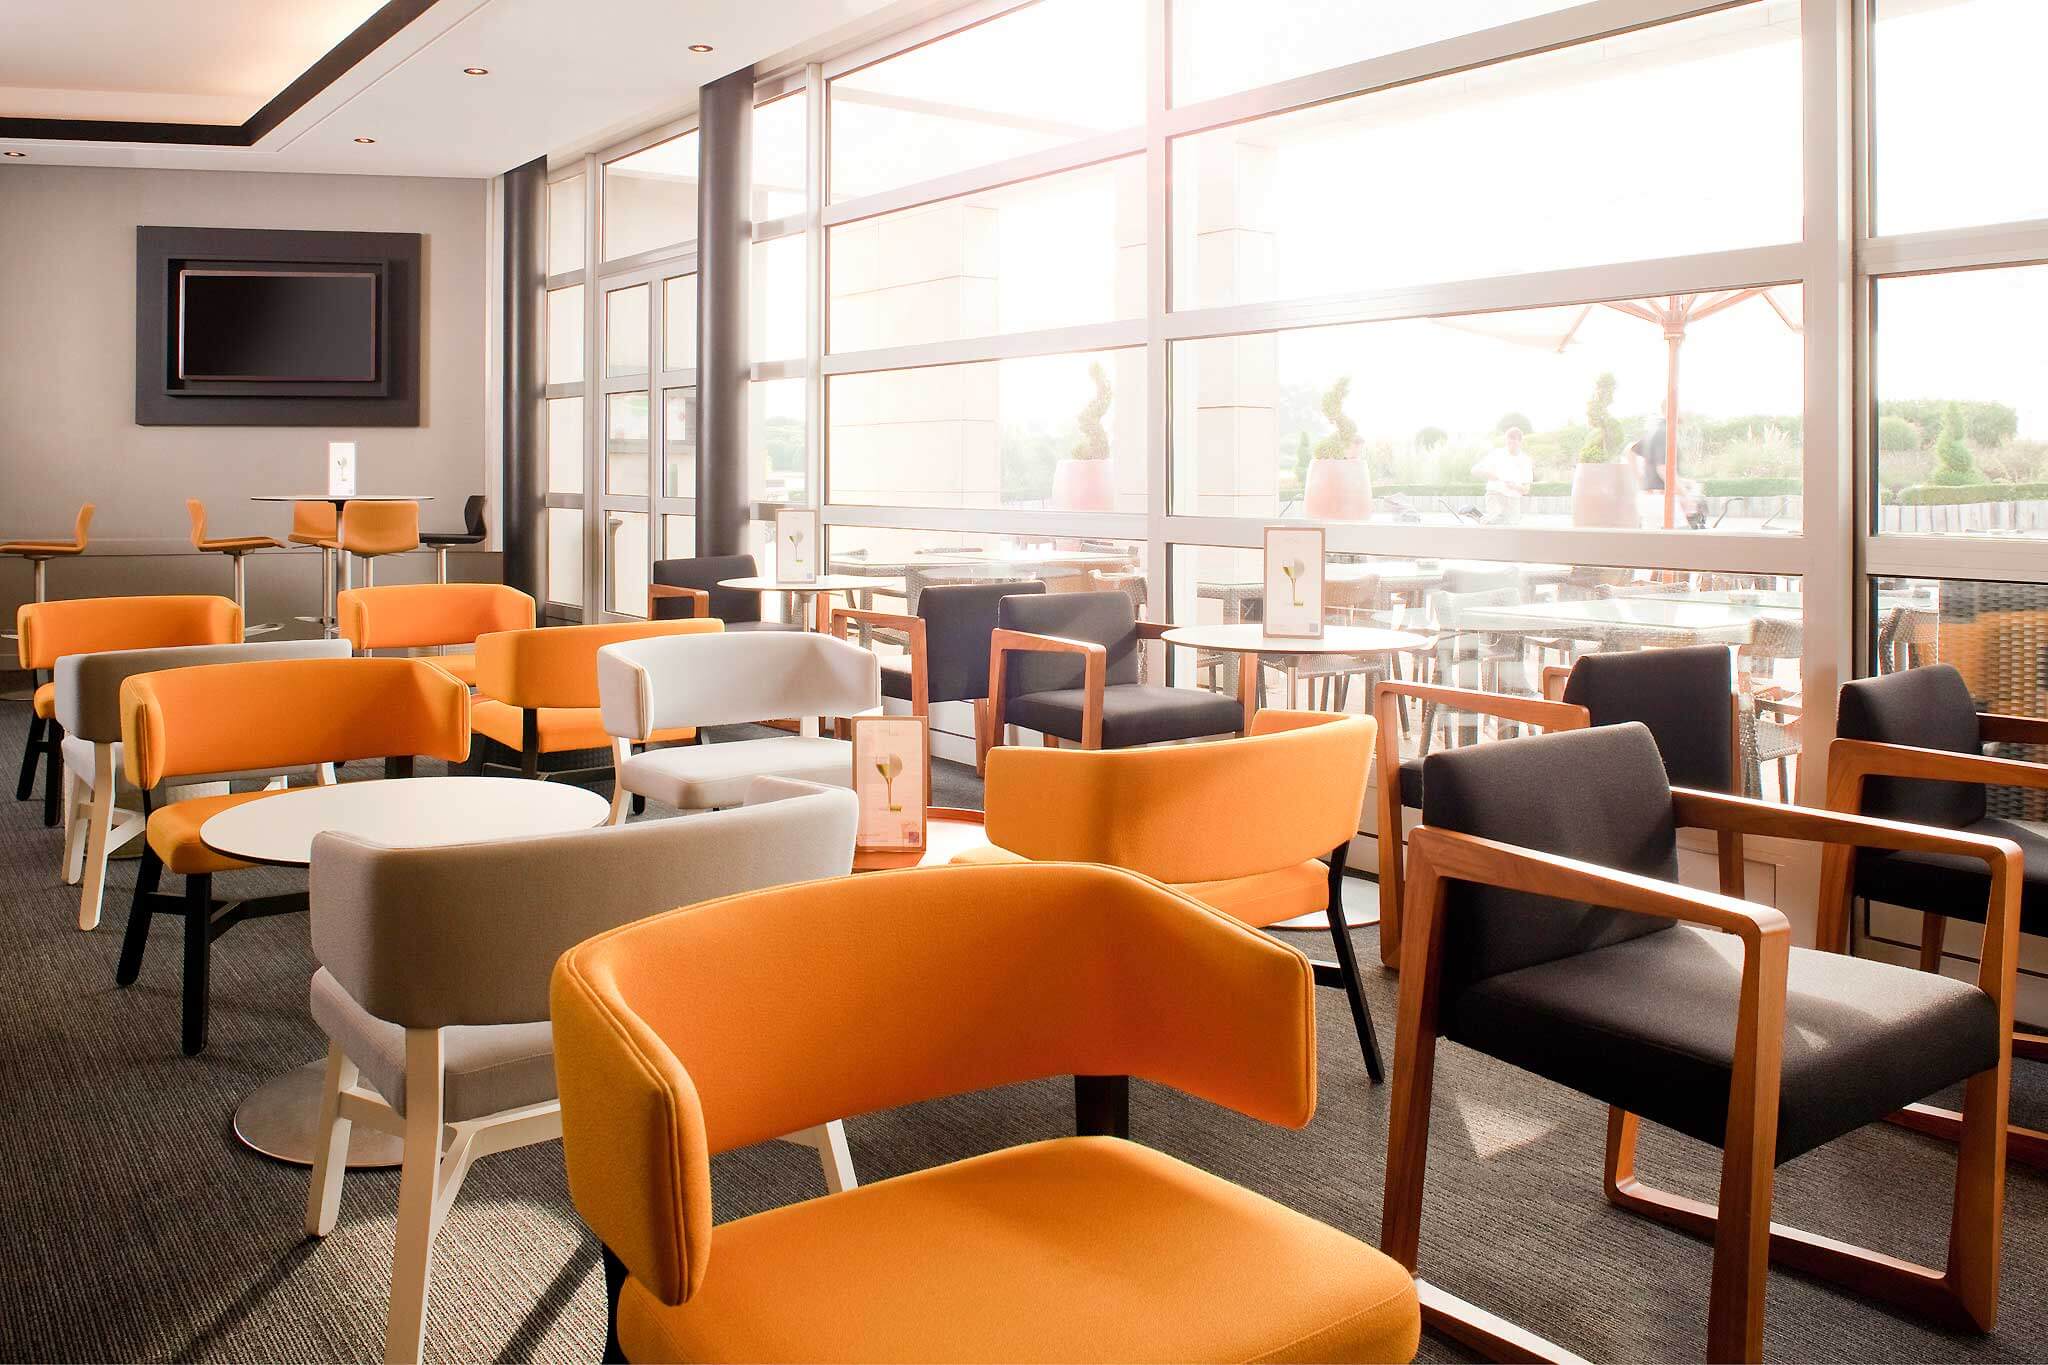 Novotel Saint Quentin Golf National's bar seating area with grey and orange chairs and tables and television on the wall